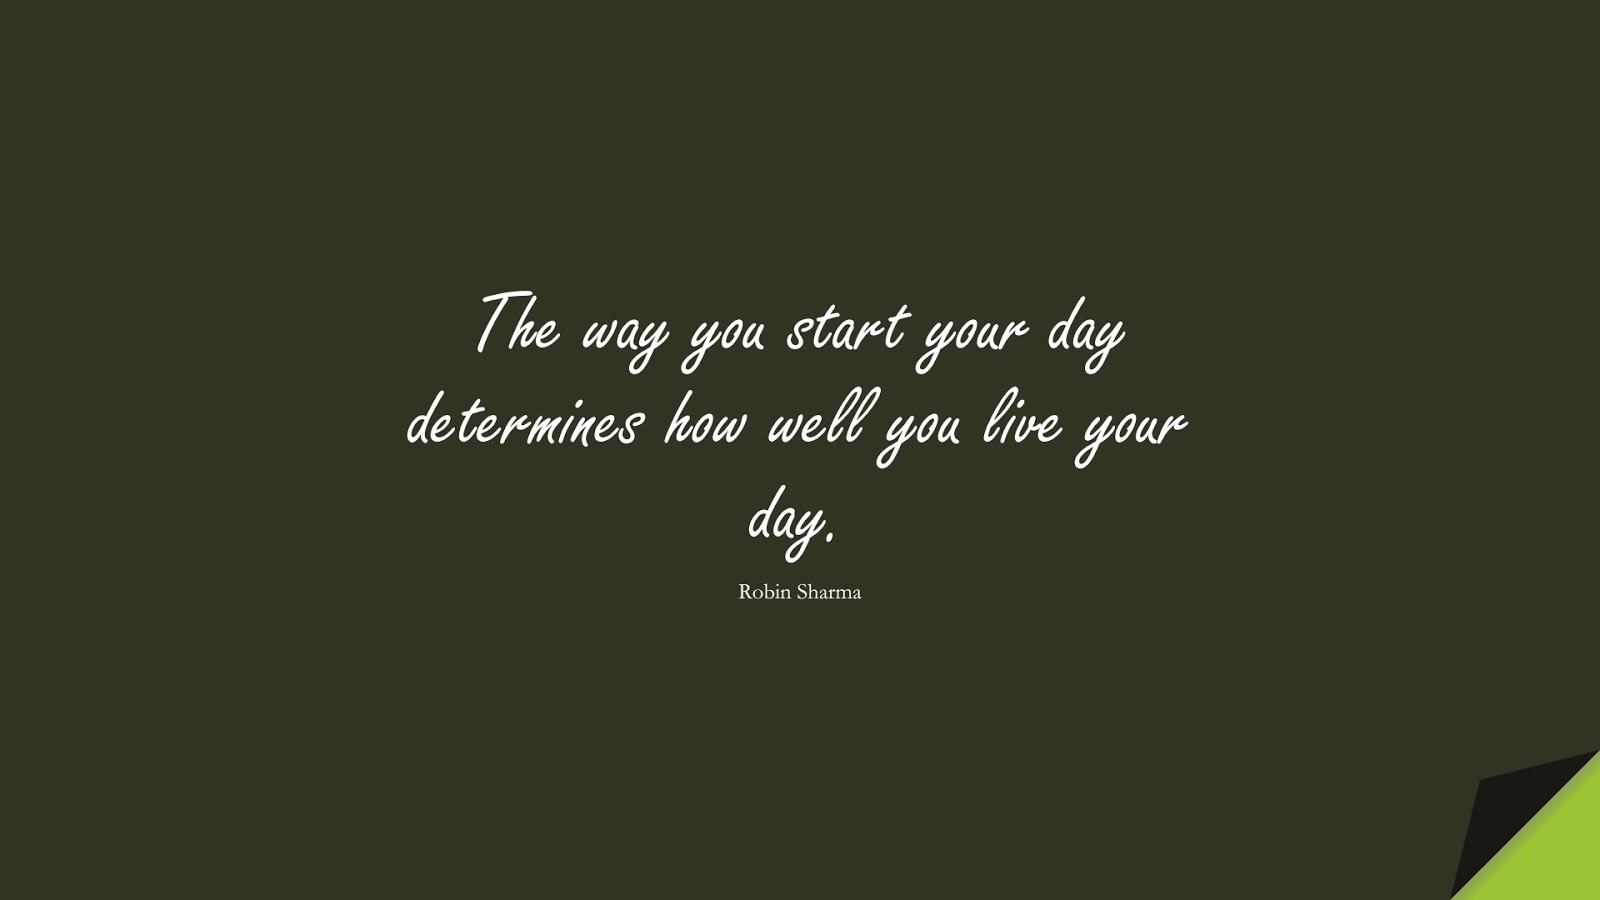 The way you start your day determines how well you live your day. (Robin Sharma);  #PositiveQuotes